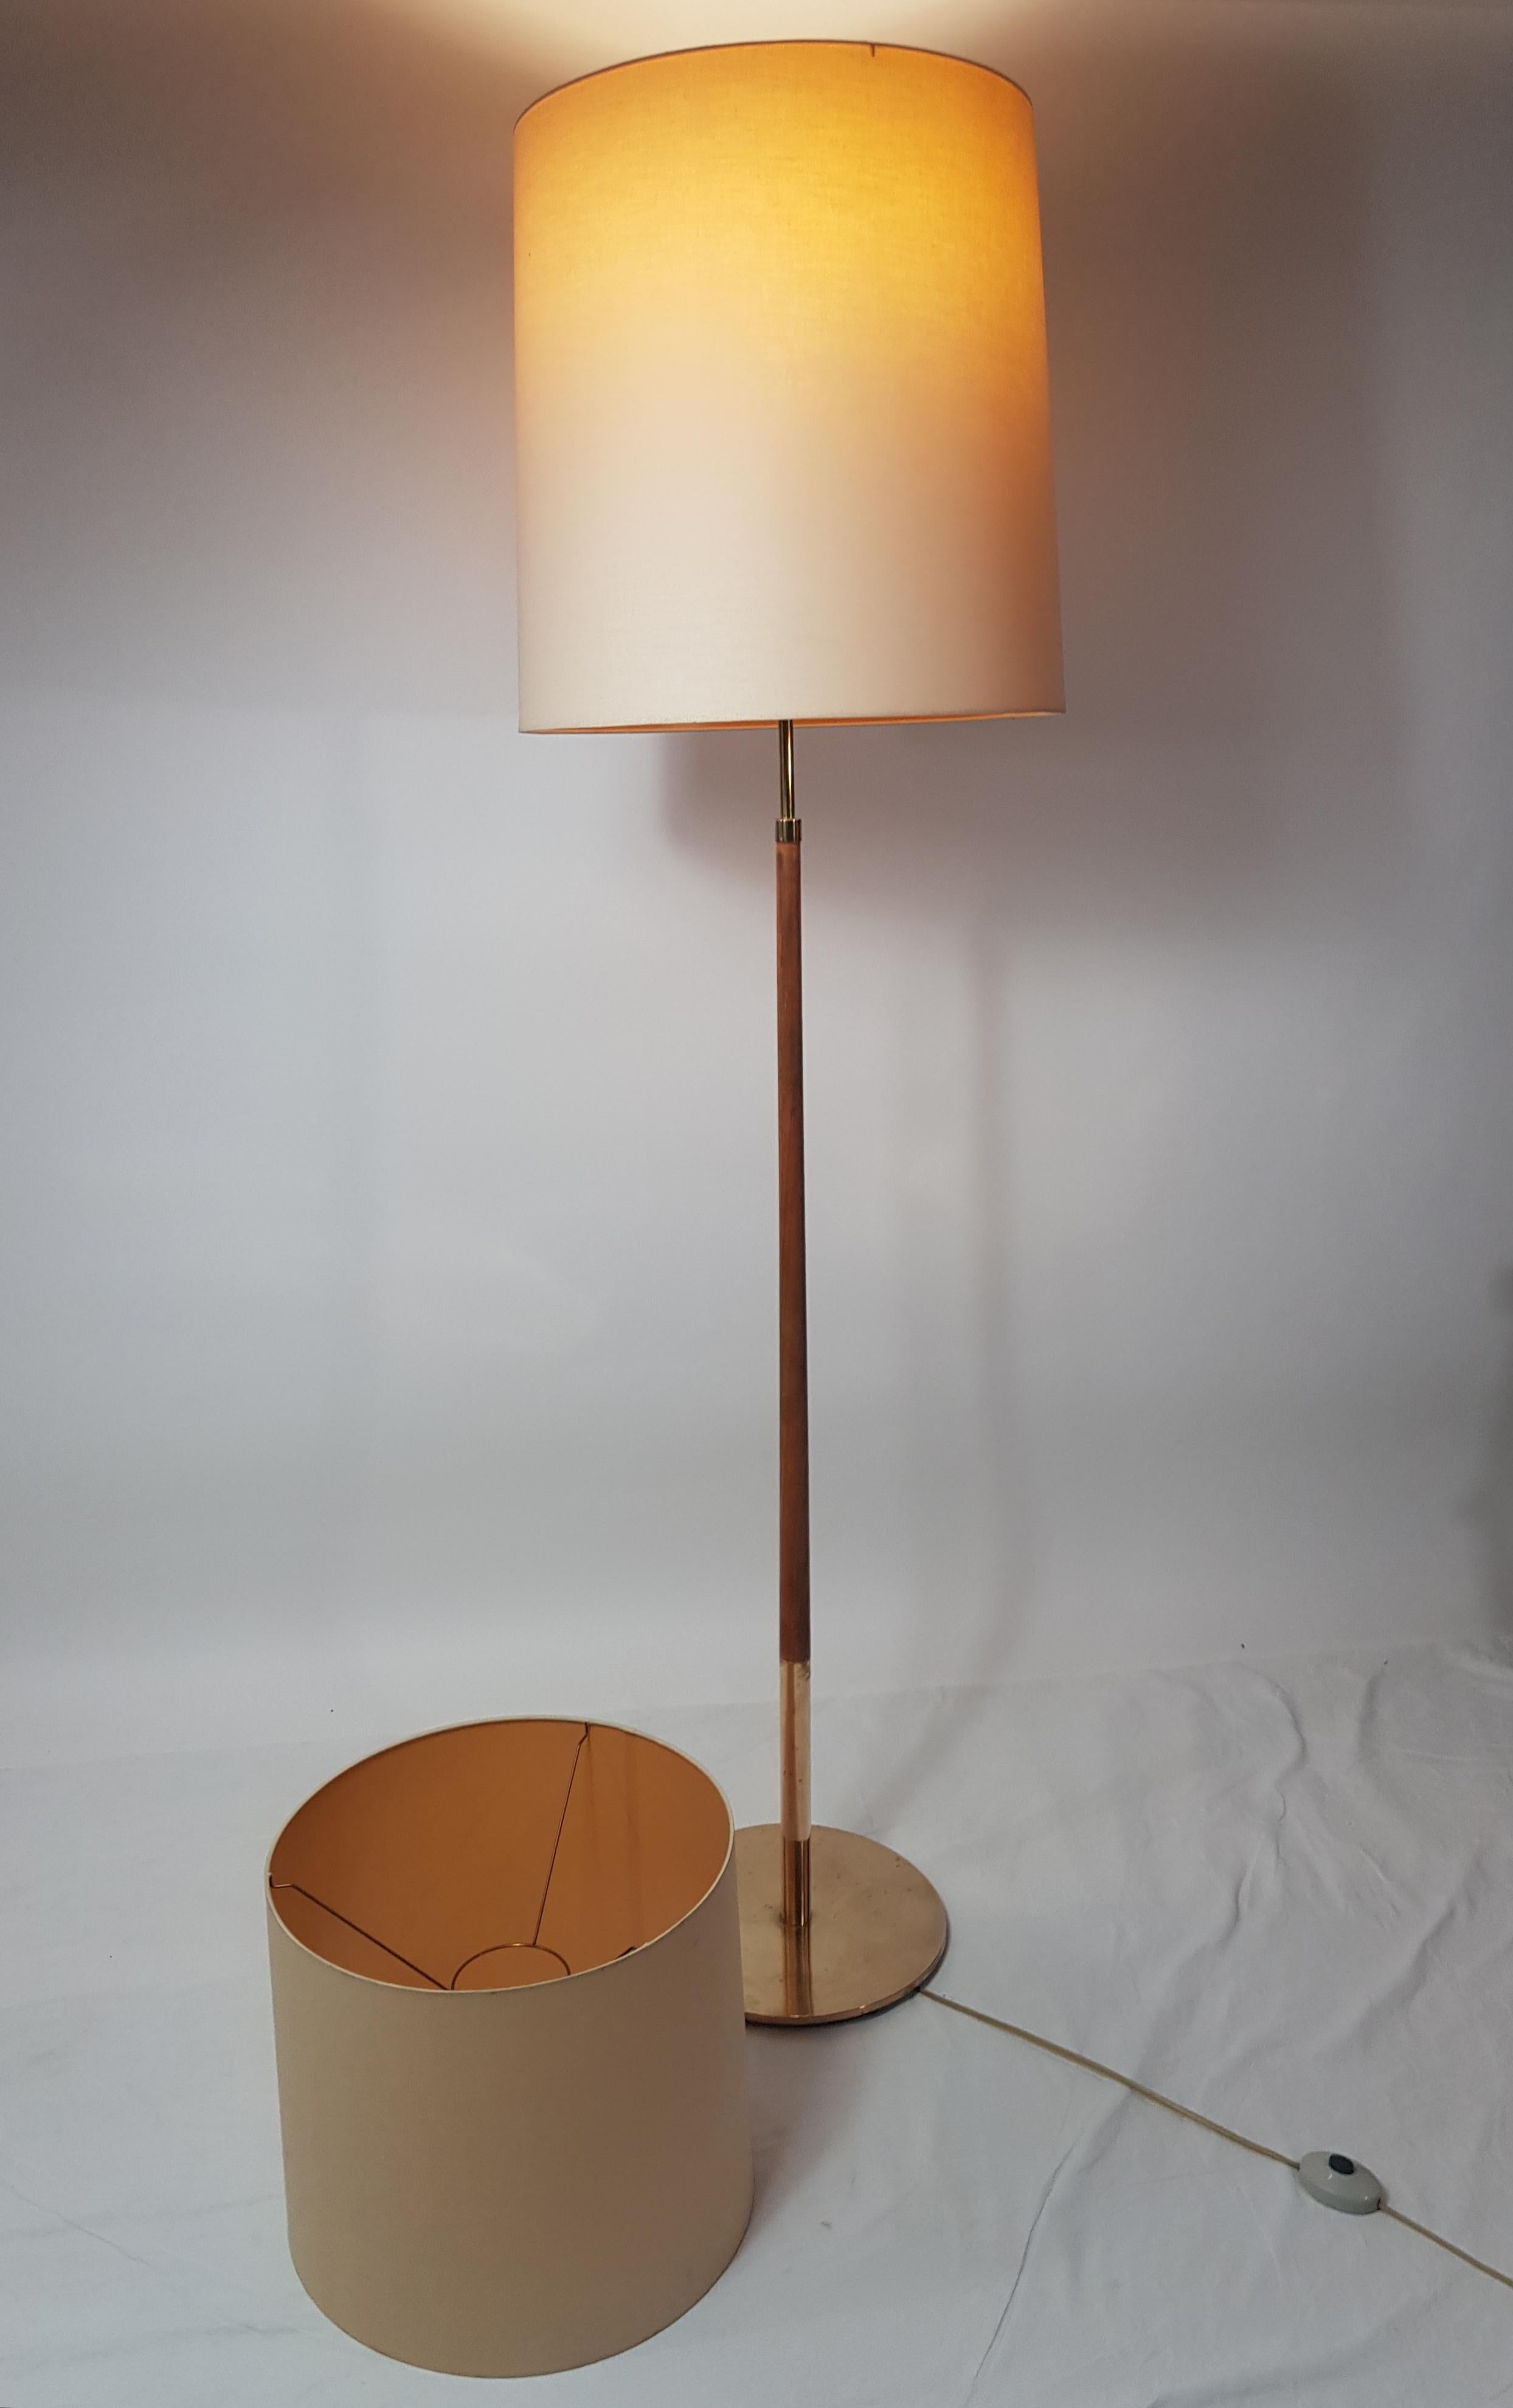 Floor lamp by th. Valentiner for Povl Dinesen denmark. 1960s. Golden brass and teak. Cream fabric lampshade. Stamped: tdv 376. Two lampshades of different sizes included 1.40cm in diameter and 33 high and 2.48cm in diameter and 47cm high.